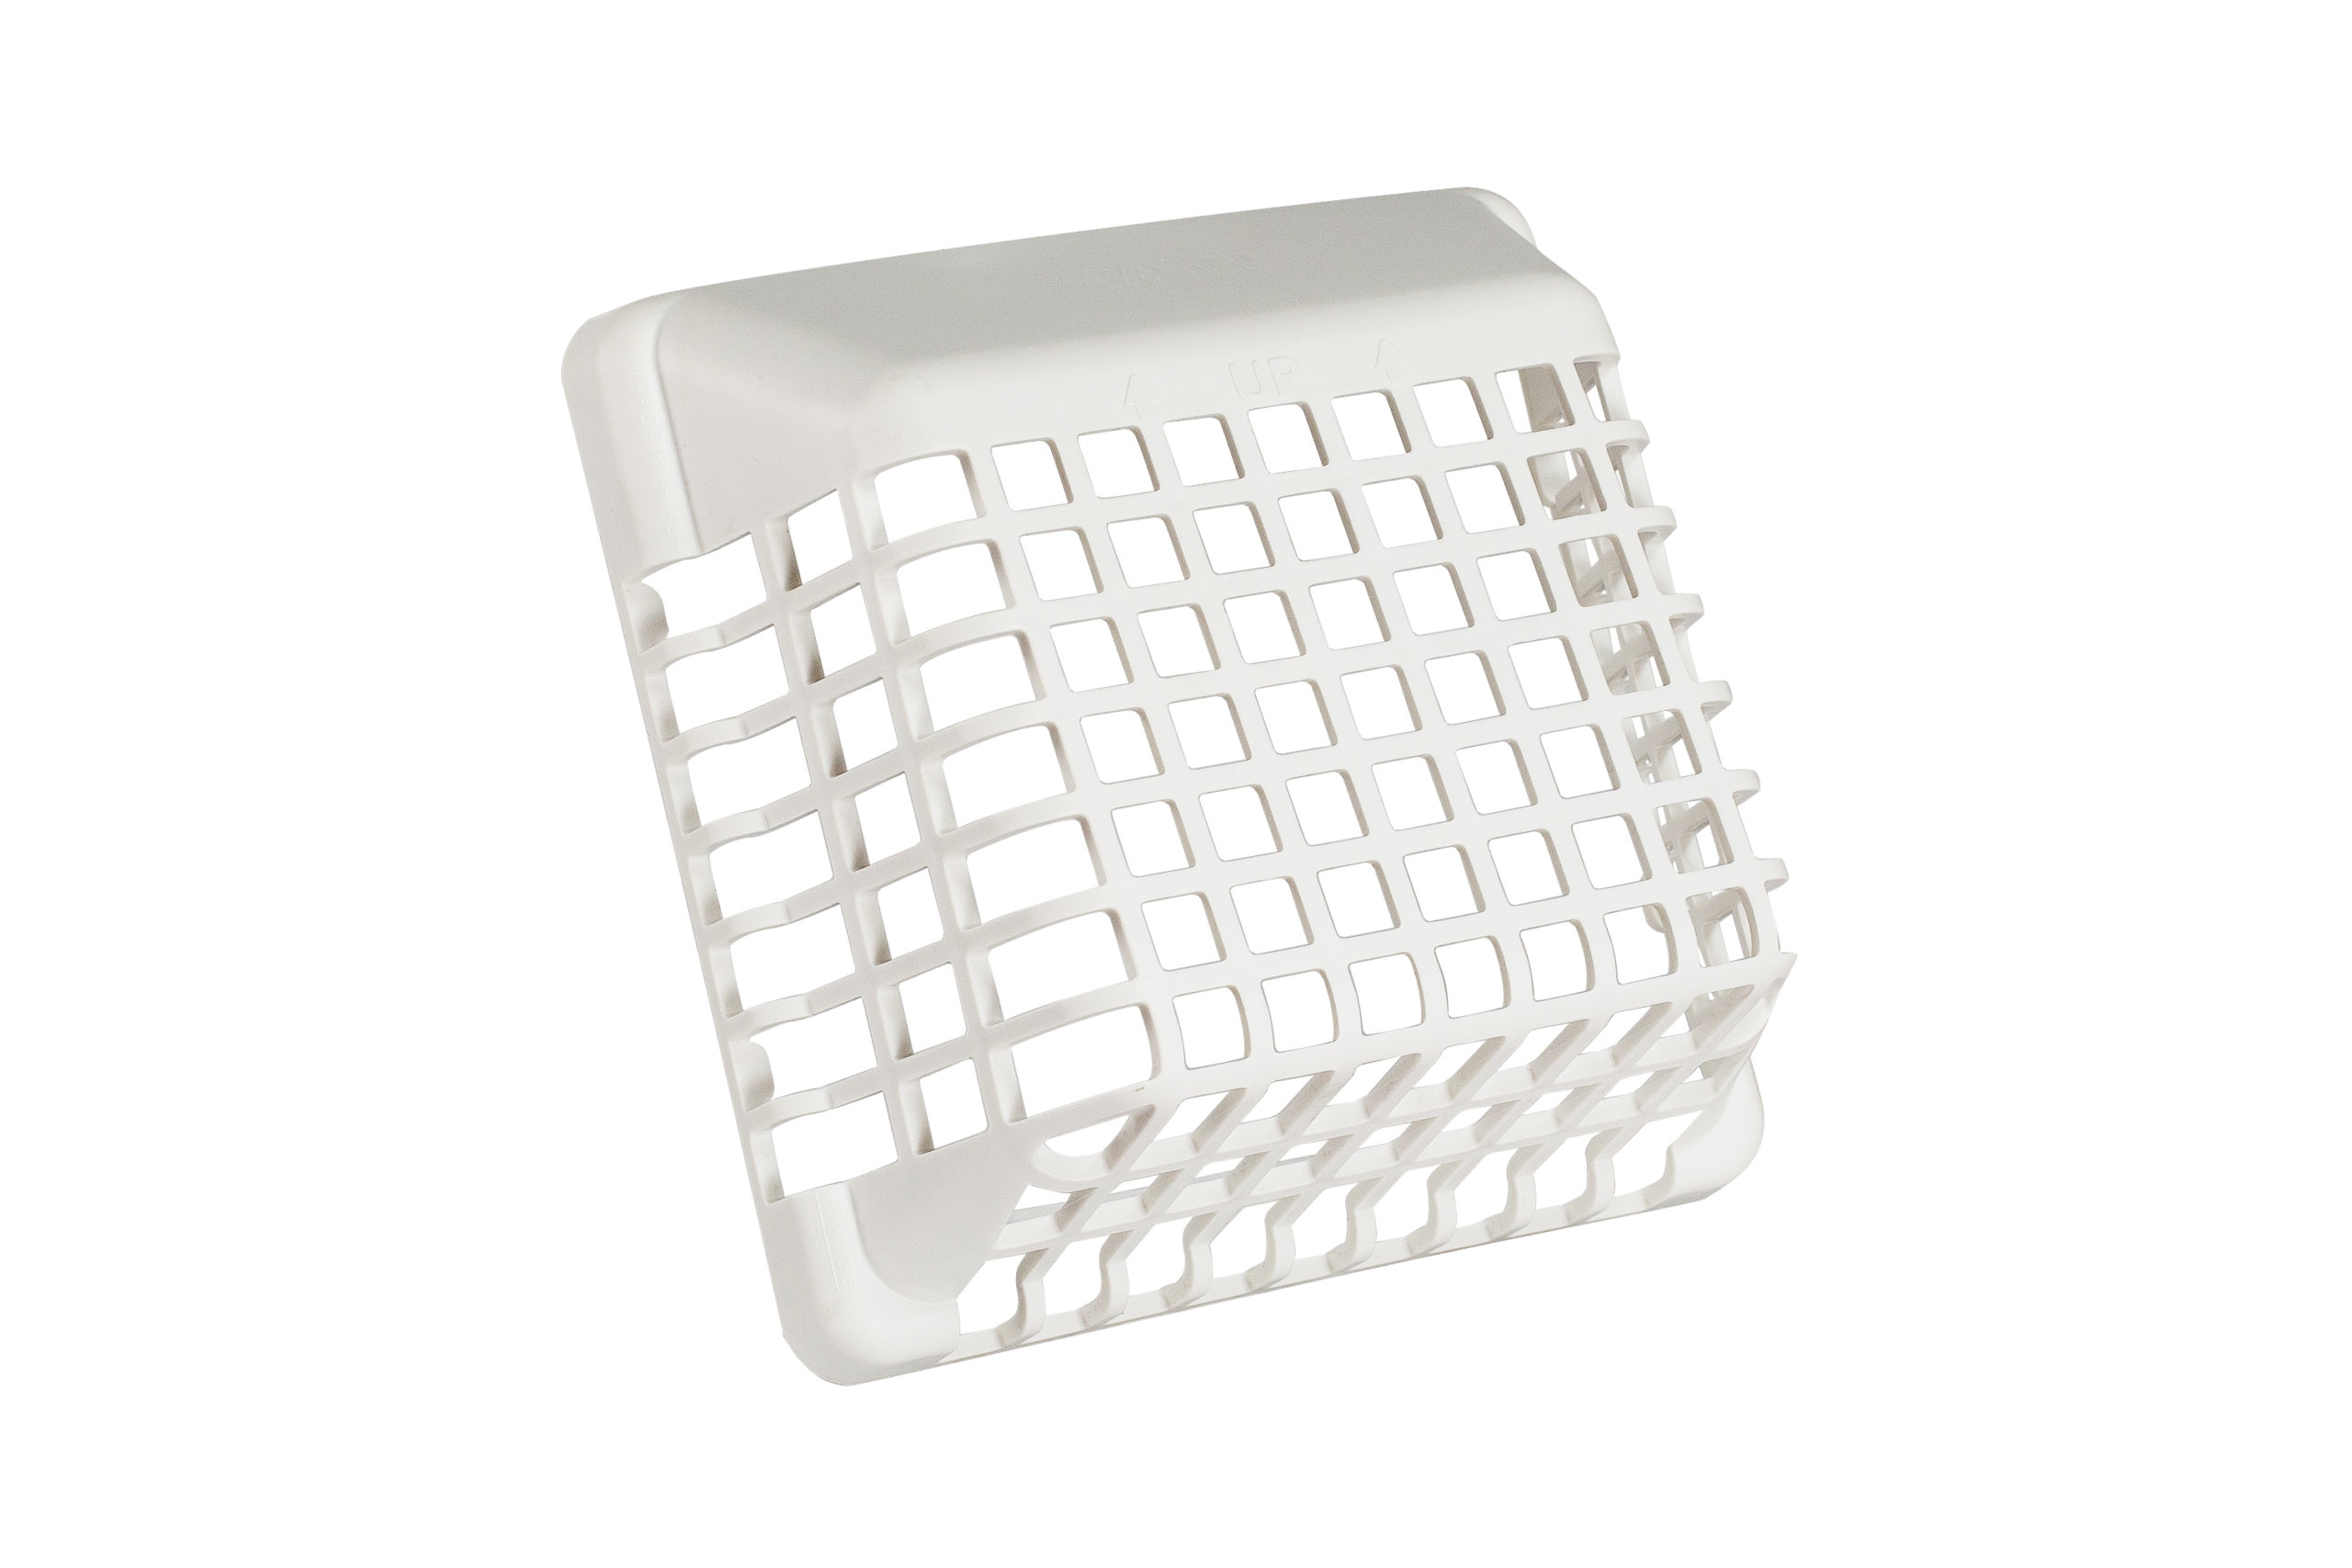 FAMCO Plastic Wall Vent Guard in white for 4" Wall Vents.